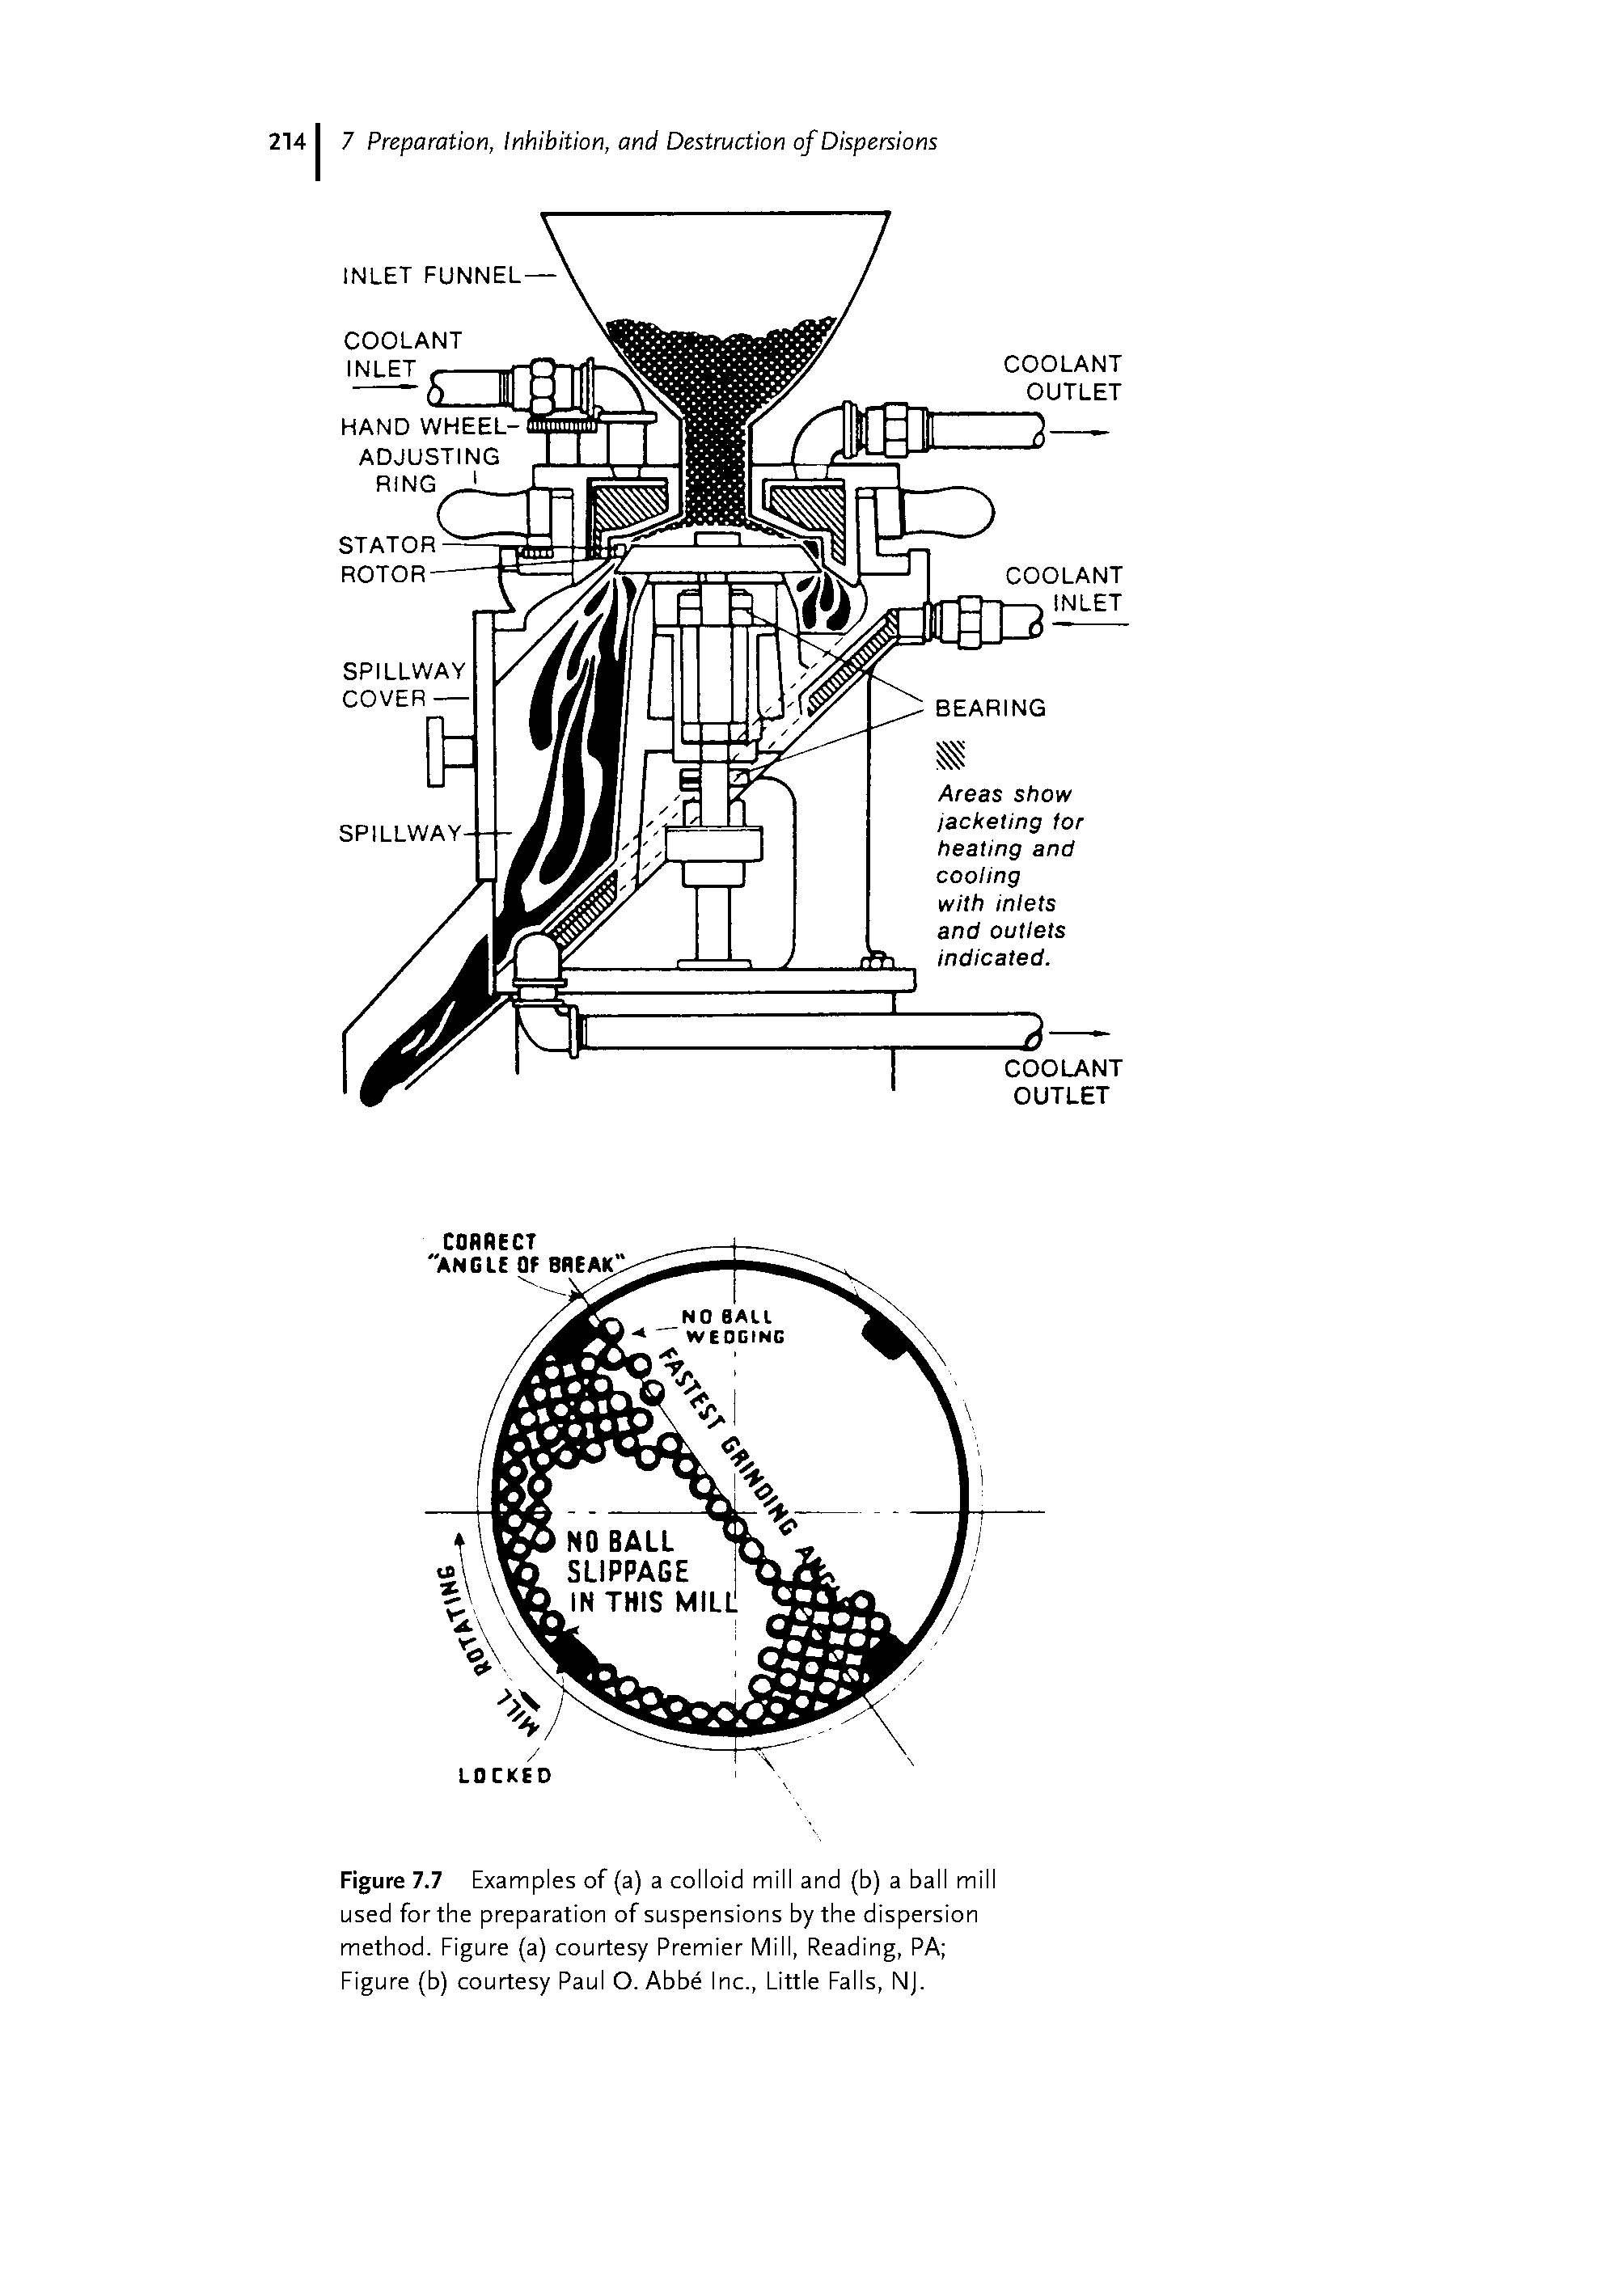 Figure 7.7 Examples of (a) a colloid mill and (b) a ball mill used for the preparation of suspensions by the dispersion method. Figure (a) courtesy Premier Mill, Reading, PA Figure (b) courtesy Paul O. Abbe Inc., Little Falls, NJ.